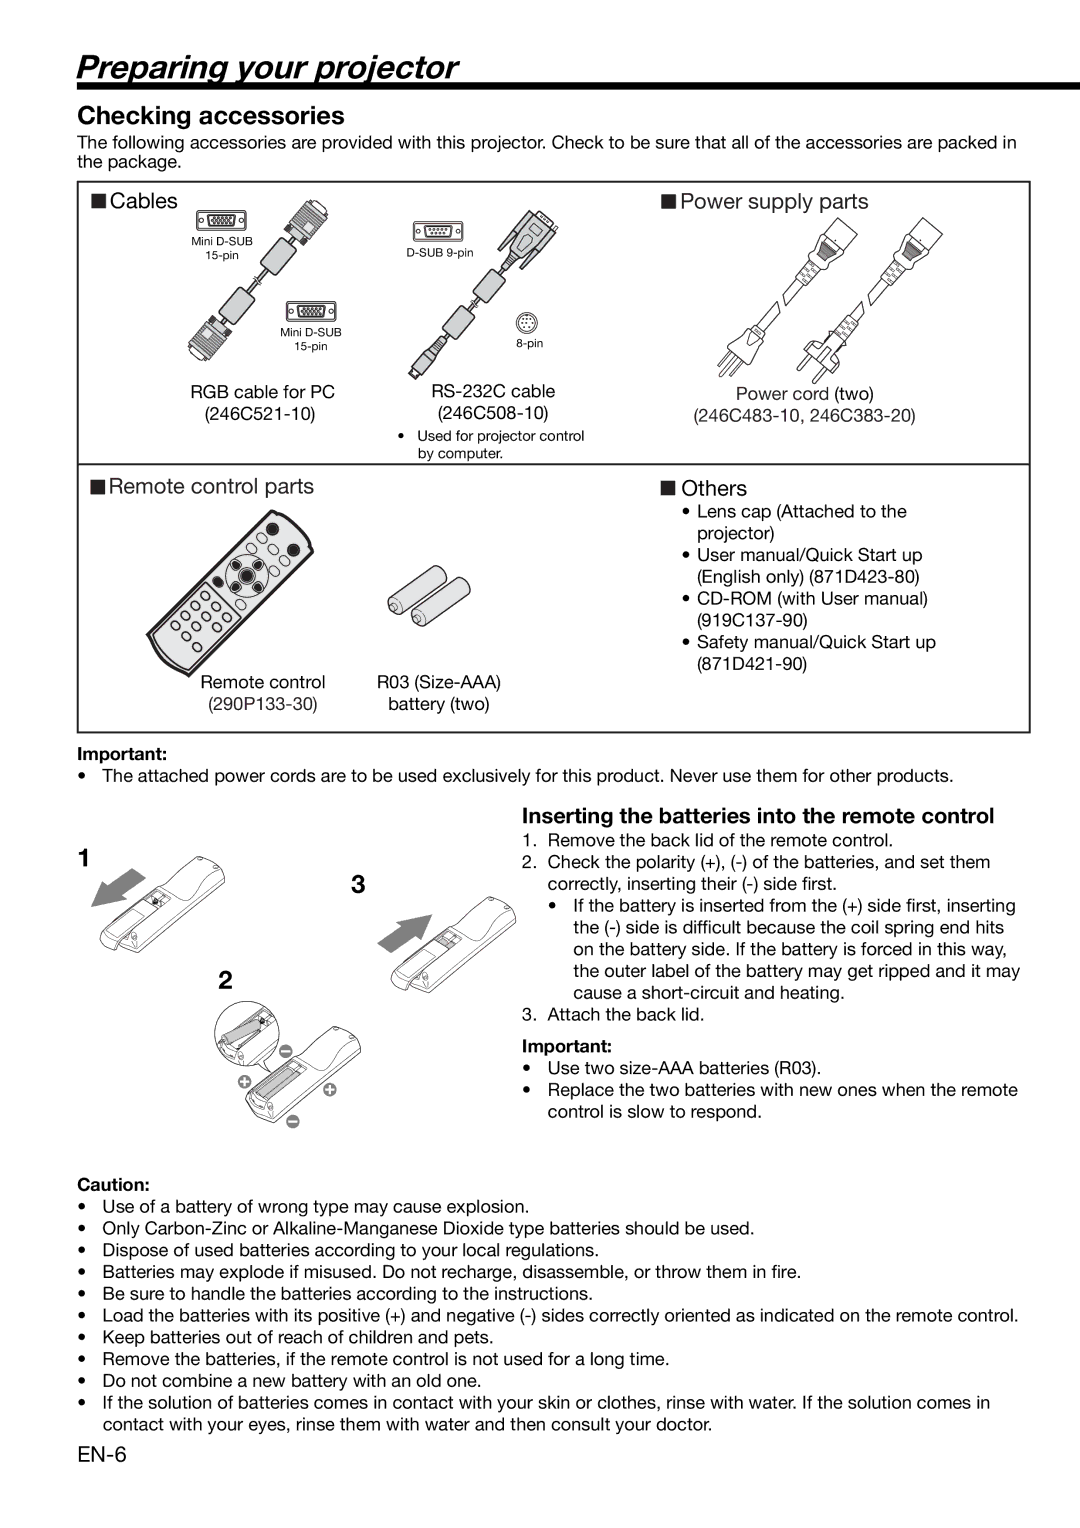 Mitsubishi Electronics HD1000 user manual Preparing your projector, Checking accessories 